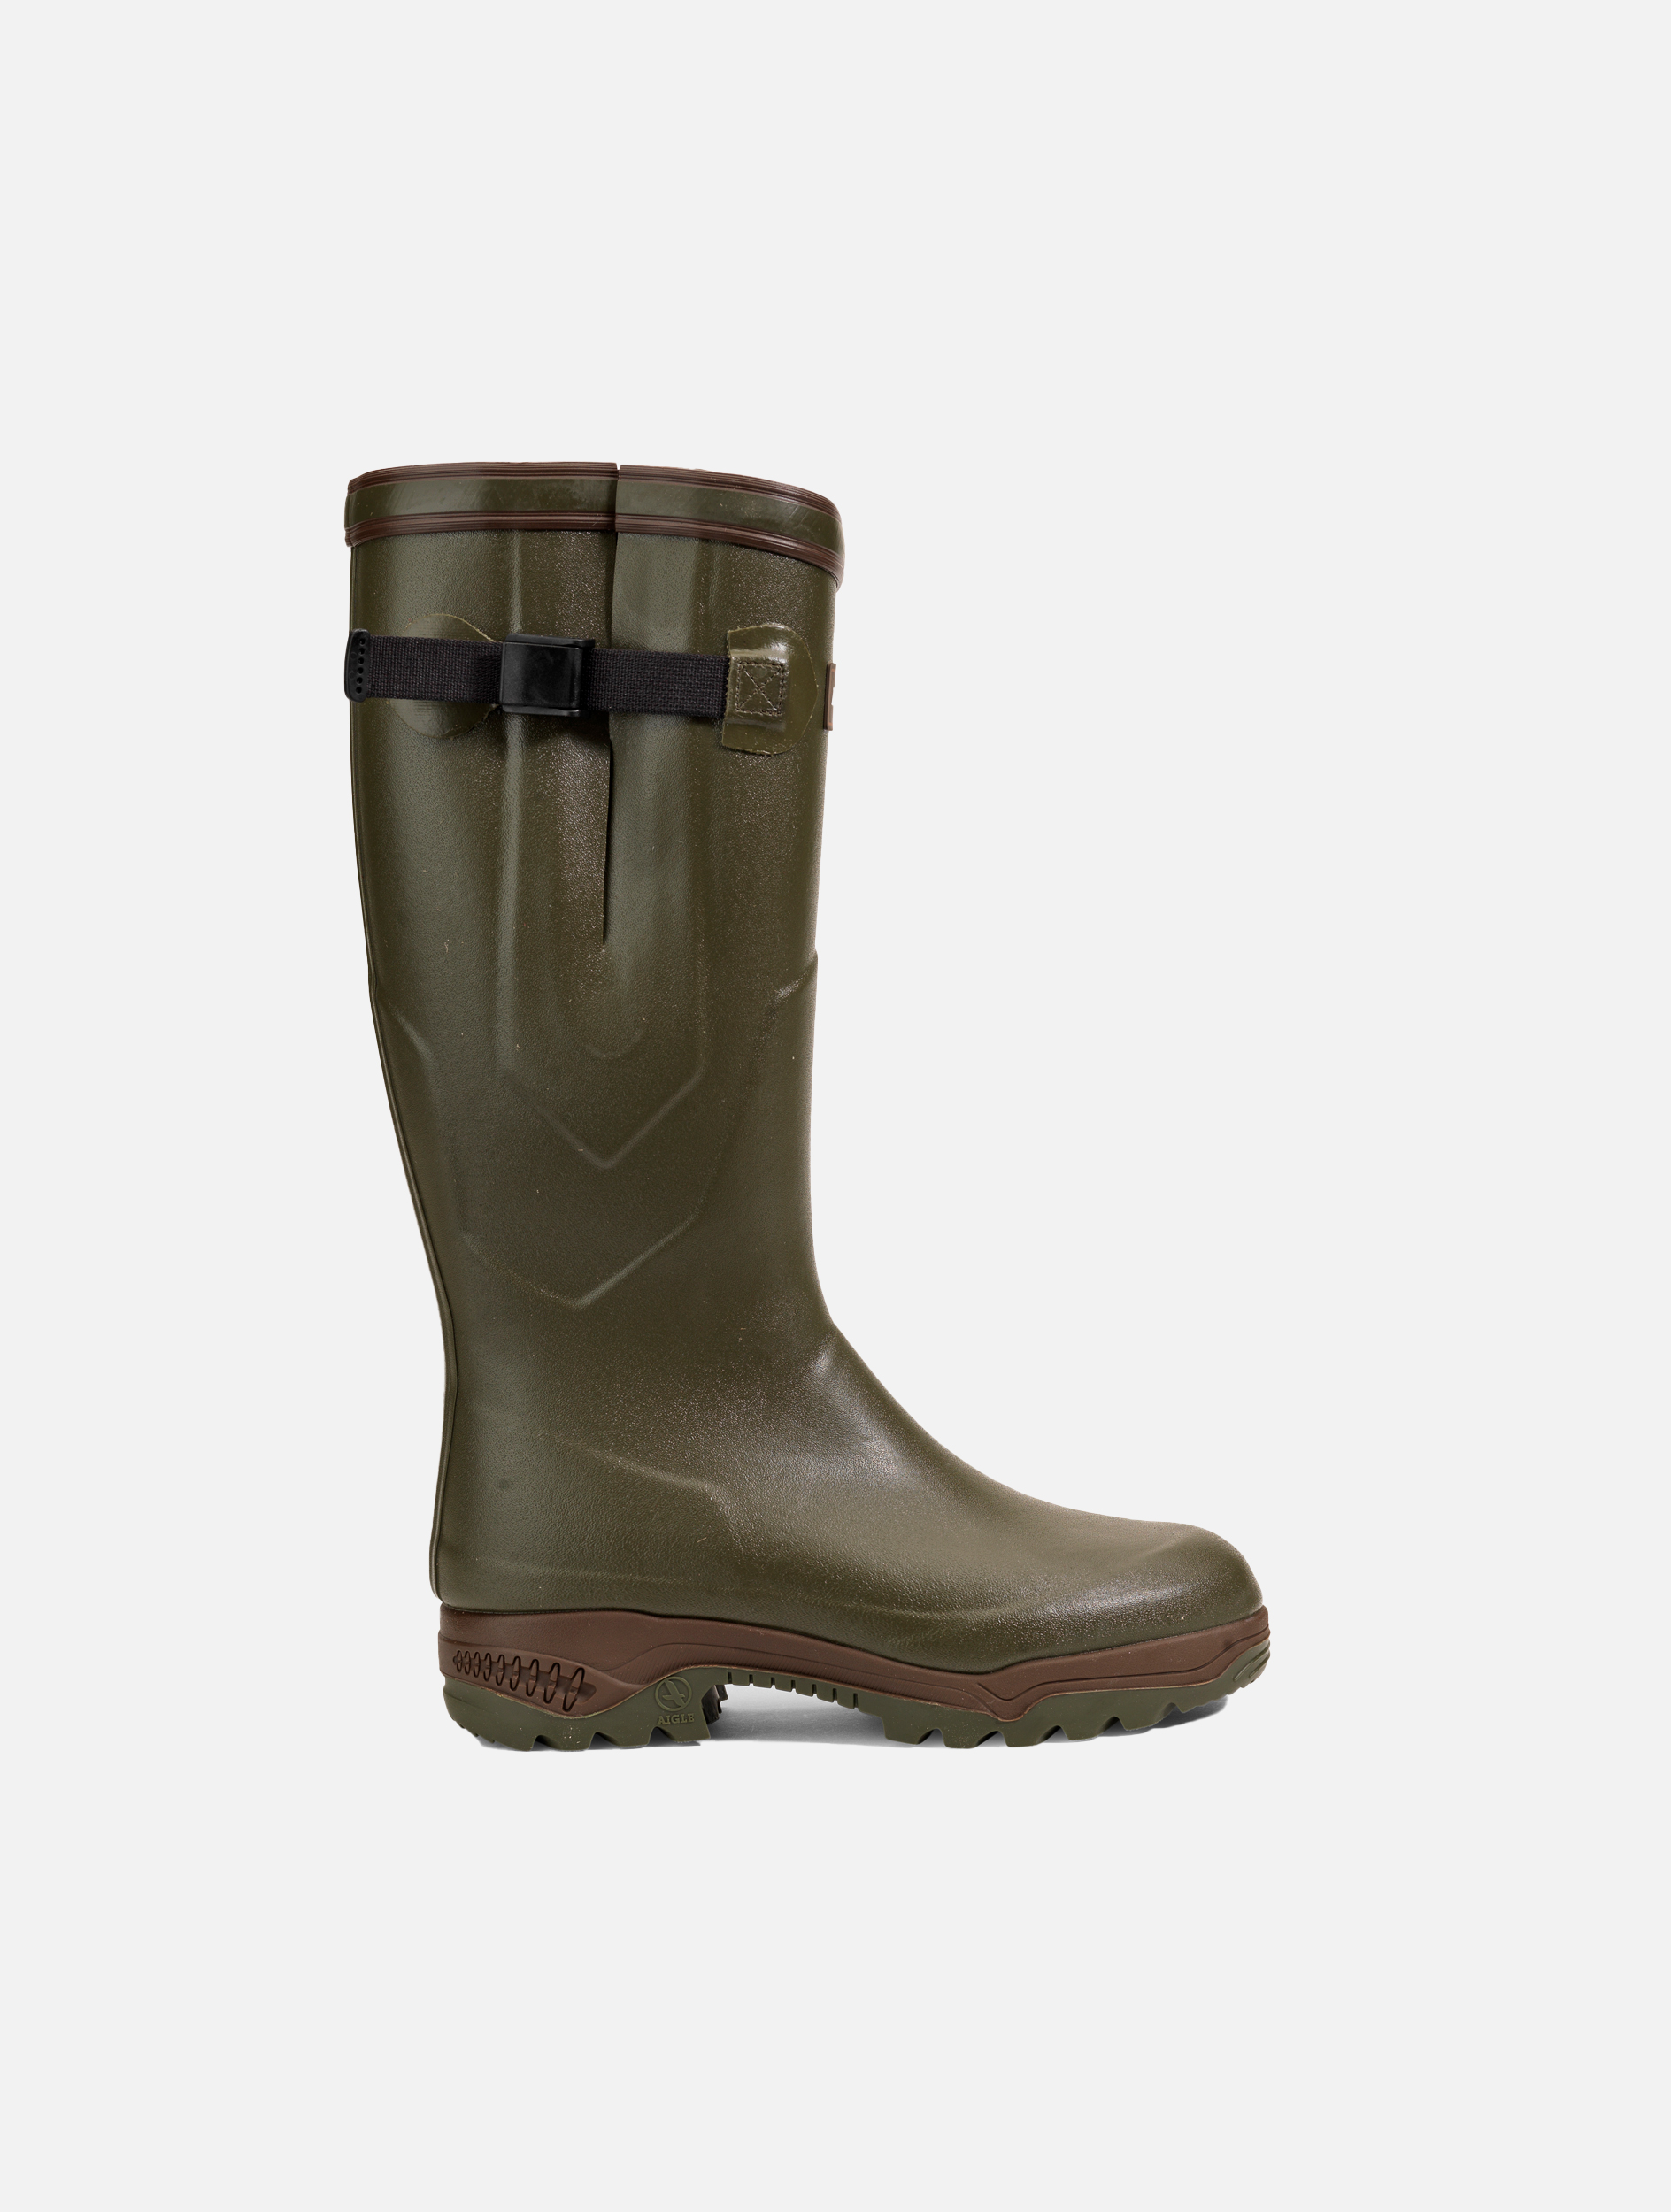 New Aigle Parcours 2 Vario Mens Womens Green Adjustable Wellies Wellington Boots 